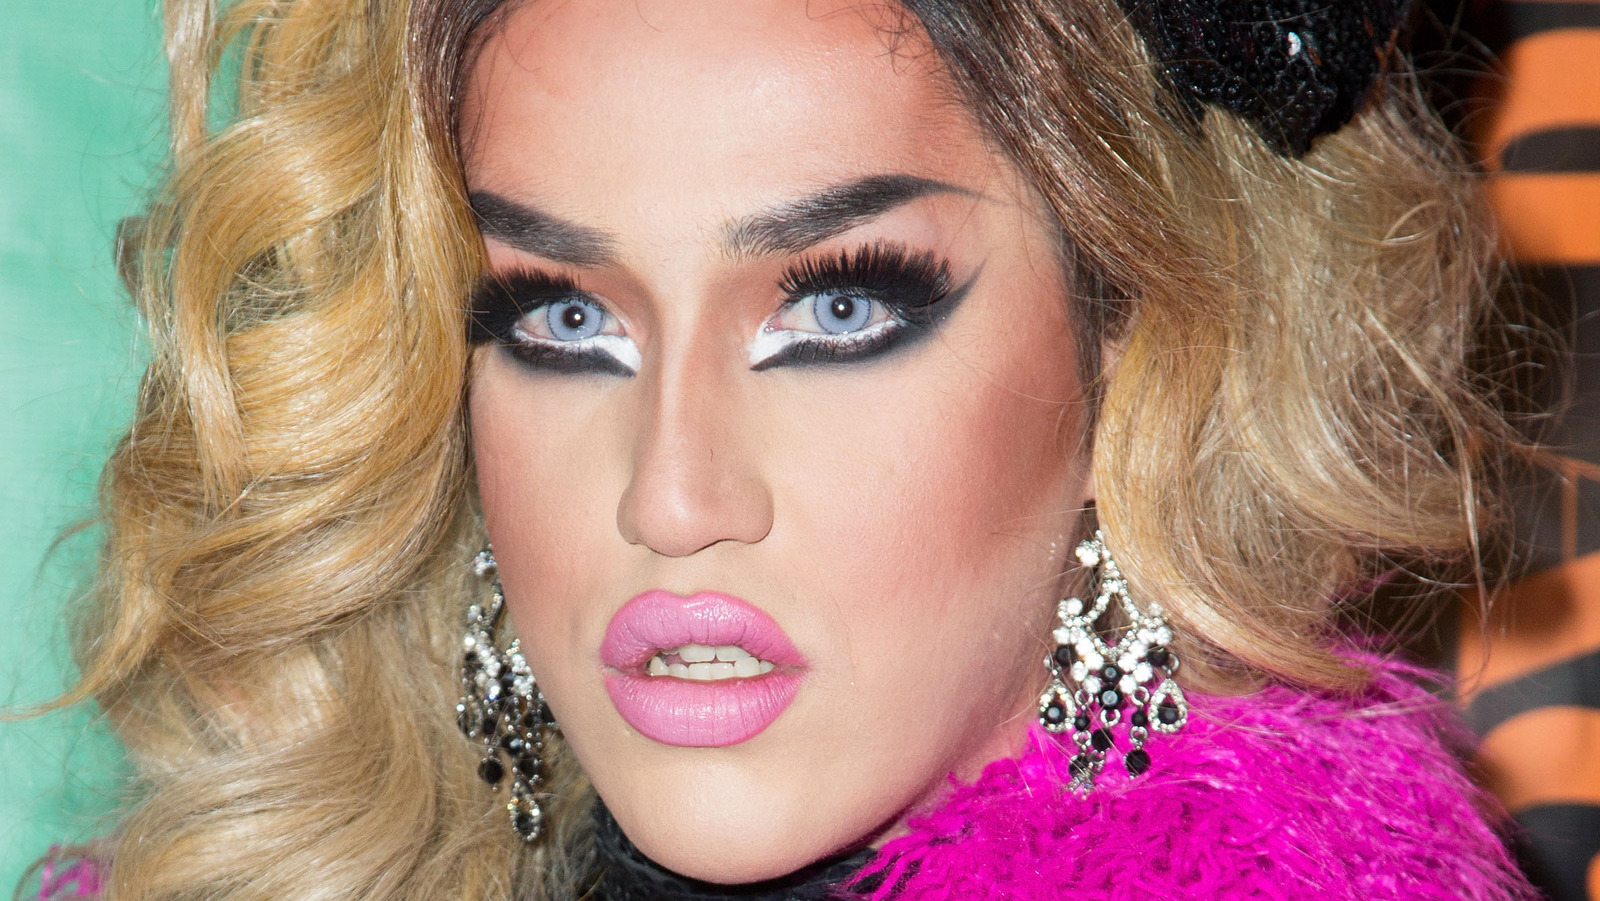 Adore Delano's Best Blue Hair Looks - wide 7